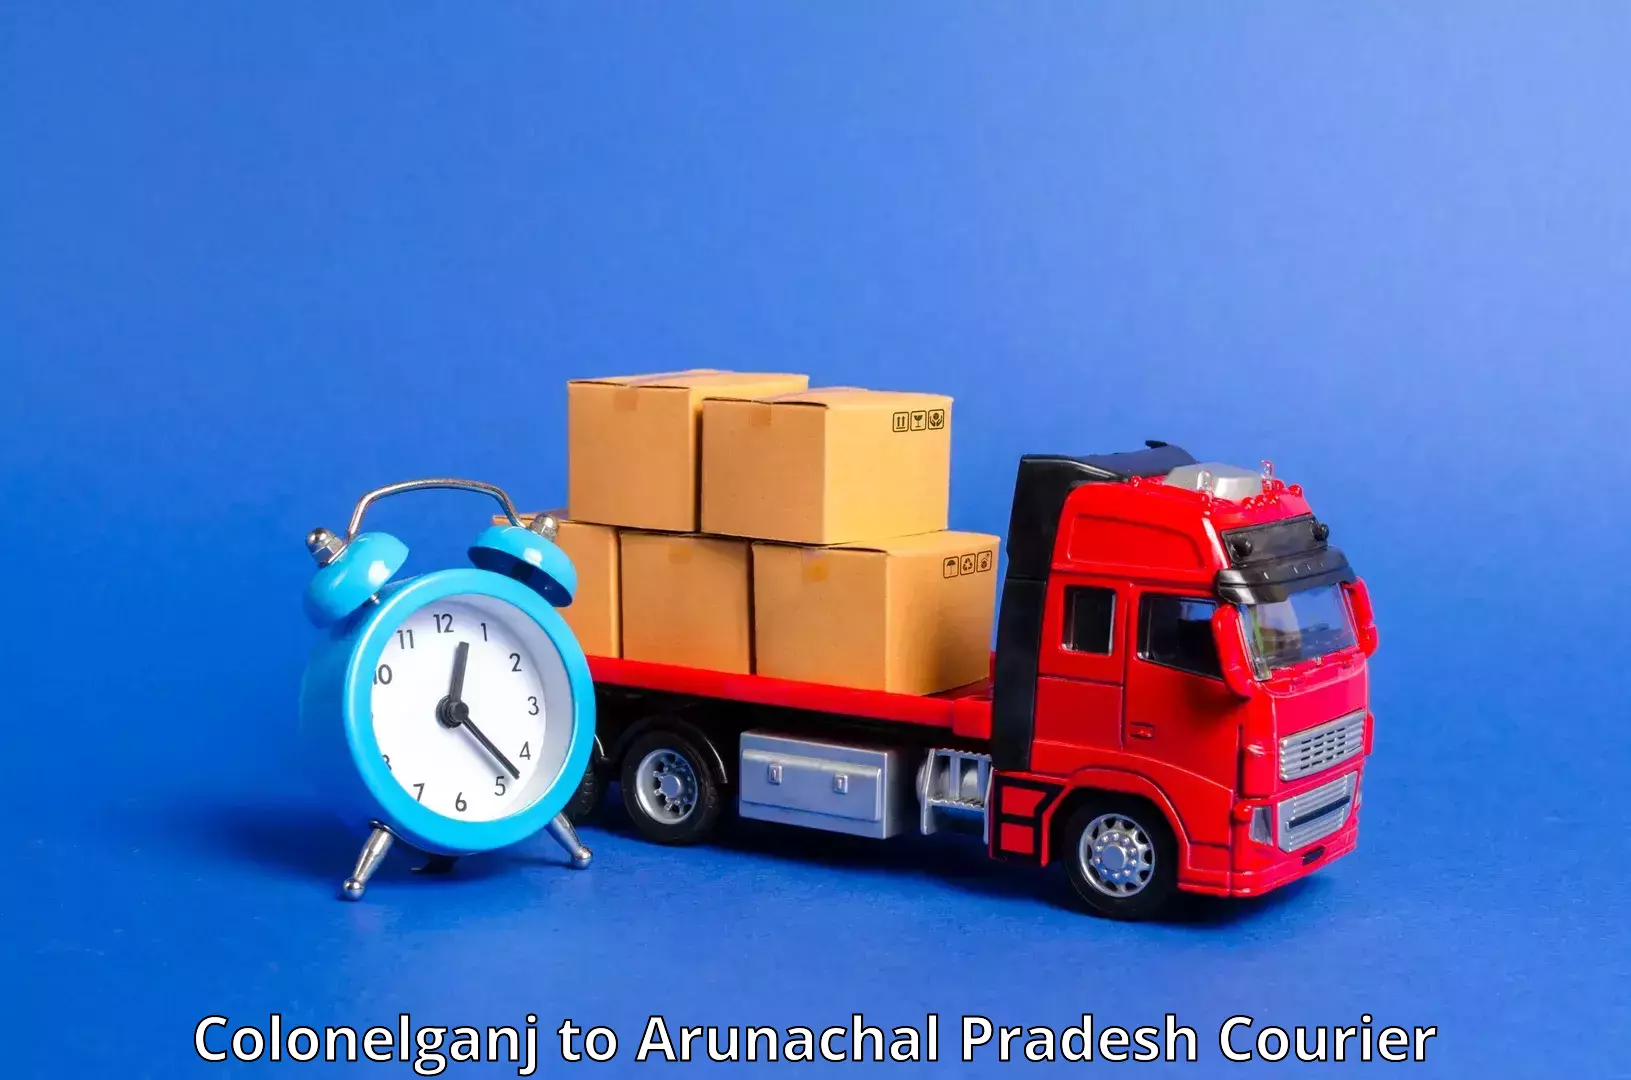 24/7 shipping services Colonelganj to Lohit